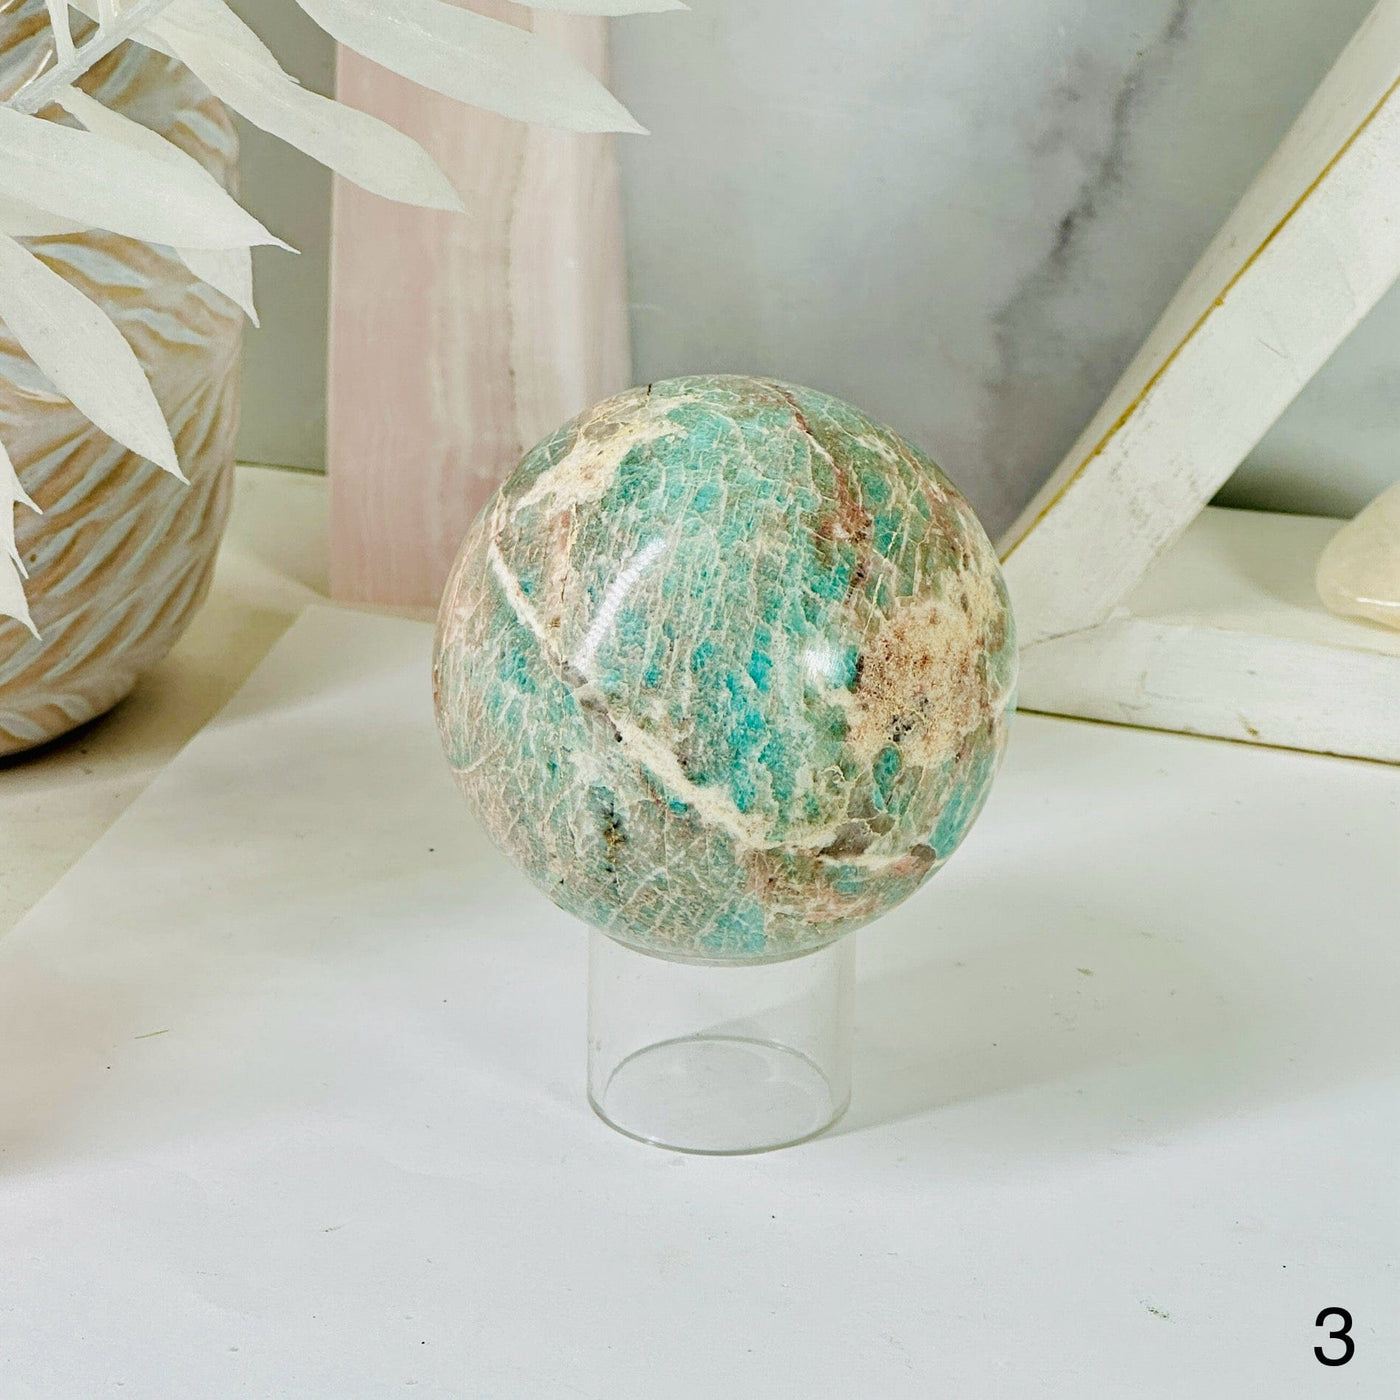 Amazonite Sphere - Crystal Ball - You Choose variant 3 labeled